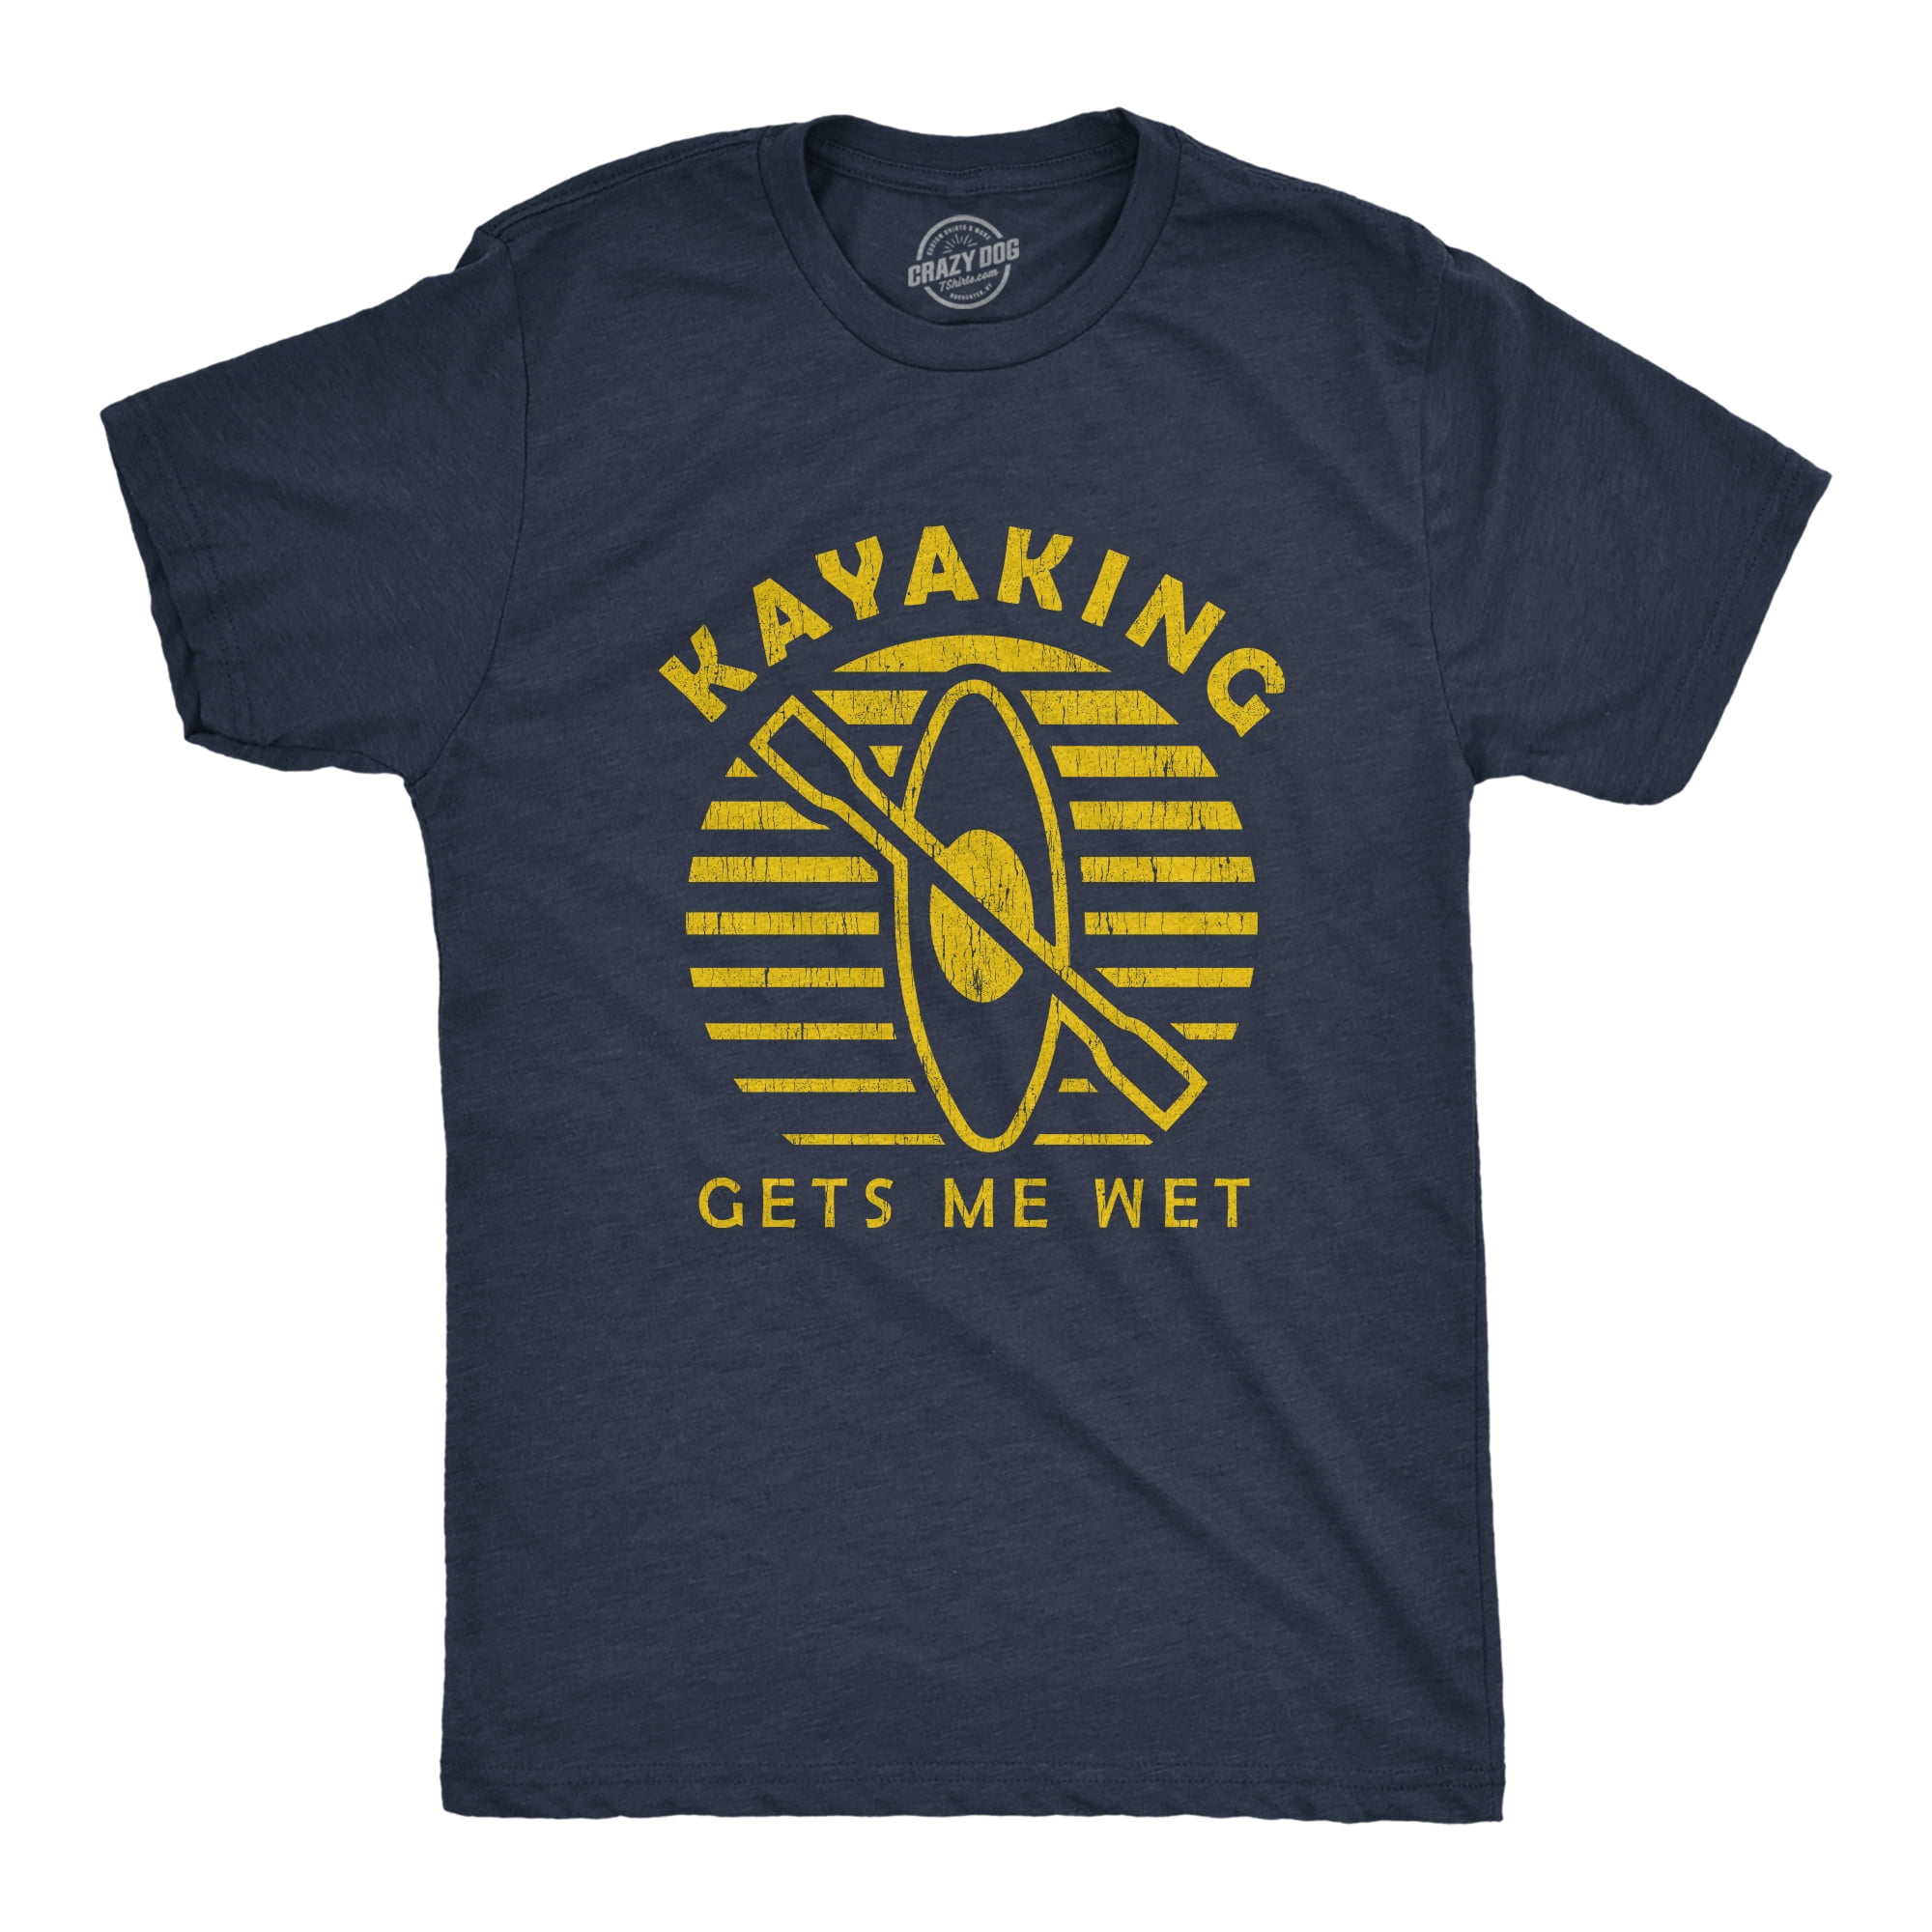 Mens Kayaking Wet Tshirt Funny Outdoor Sexual Innuendo Paddle Graphic (Heather Navy) - S Graphic Tees - Walmart.com